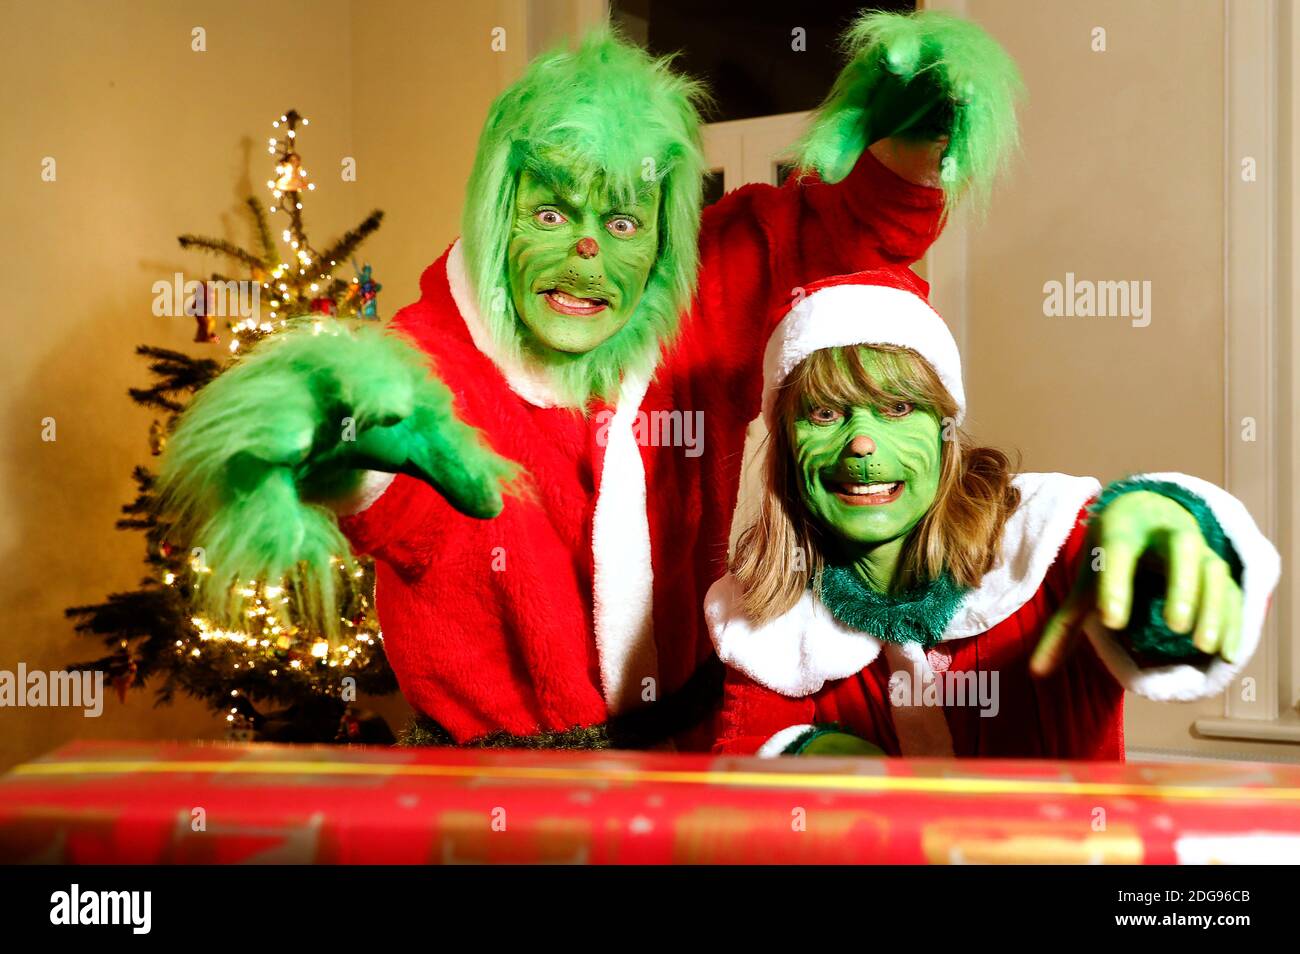 GEEK ART - Bodypainting and Transformaking: 'The Grinch steals Christmas'  photoshooting with Enrico Lein as Grinch and Maria Skupin as Mrs. Grinch at  Villa Czarnecki in Hameln on December 7, 2020 -